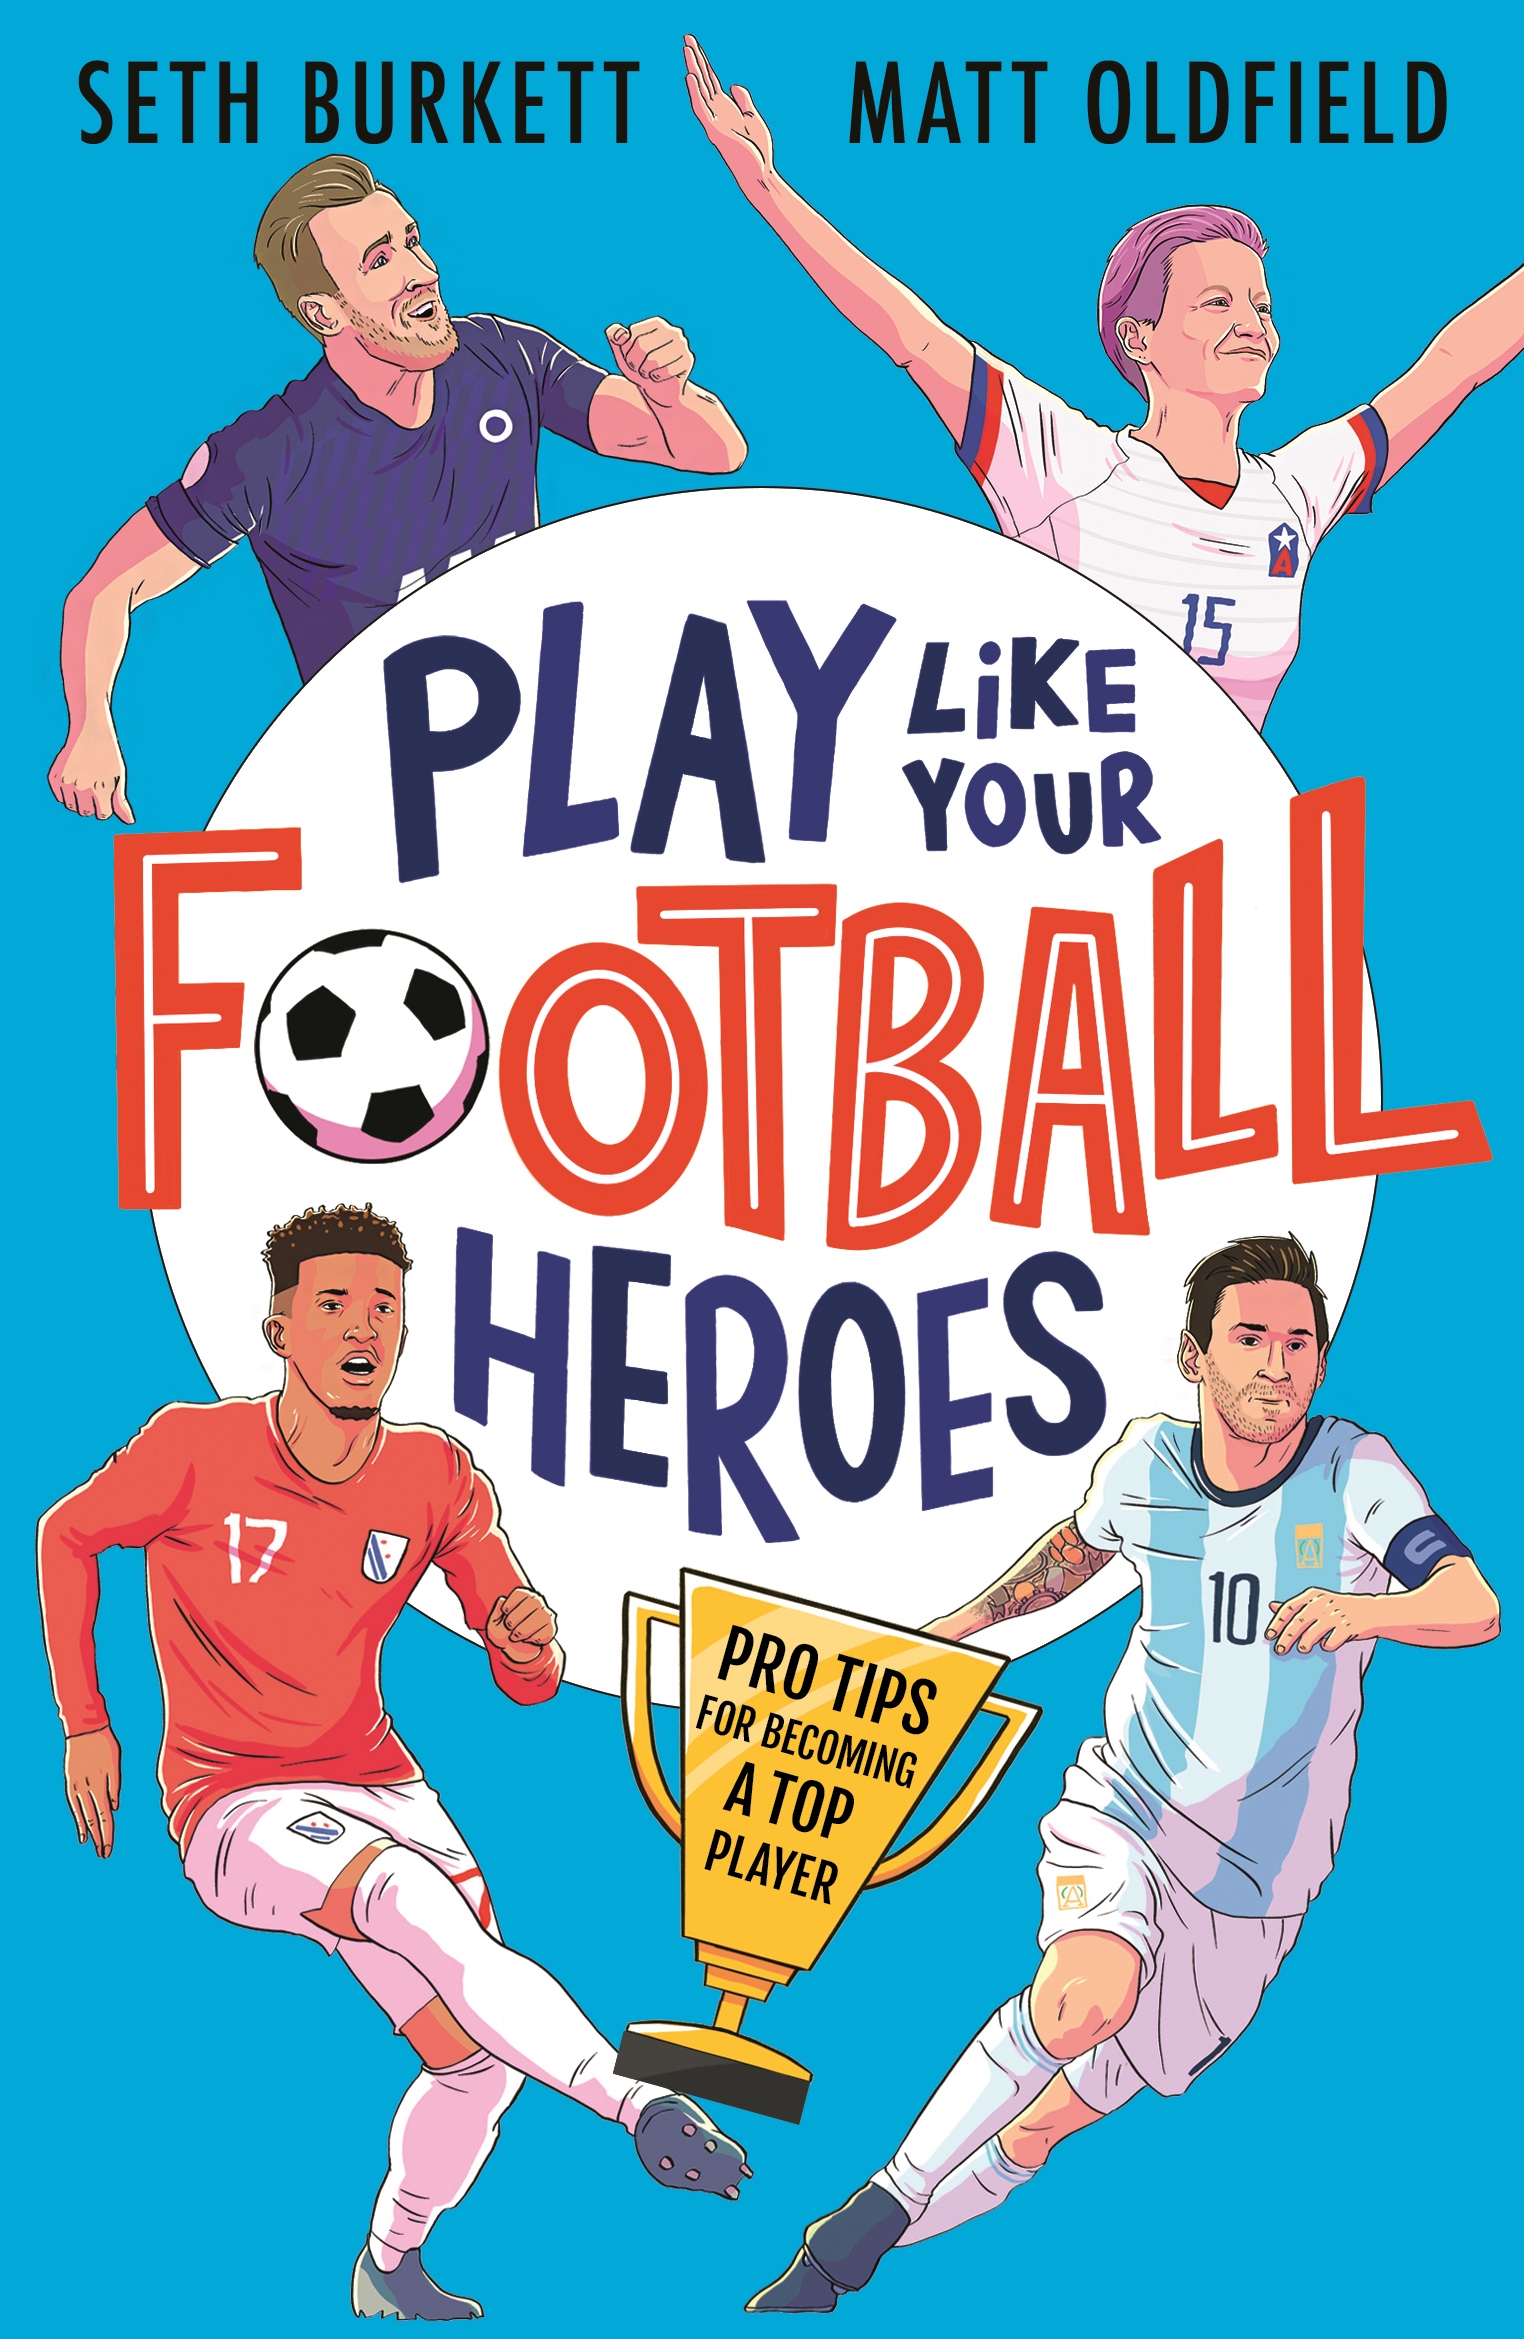 Play like Your Heroes by Seth Burkett and Matt Oldfield